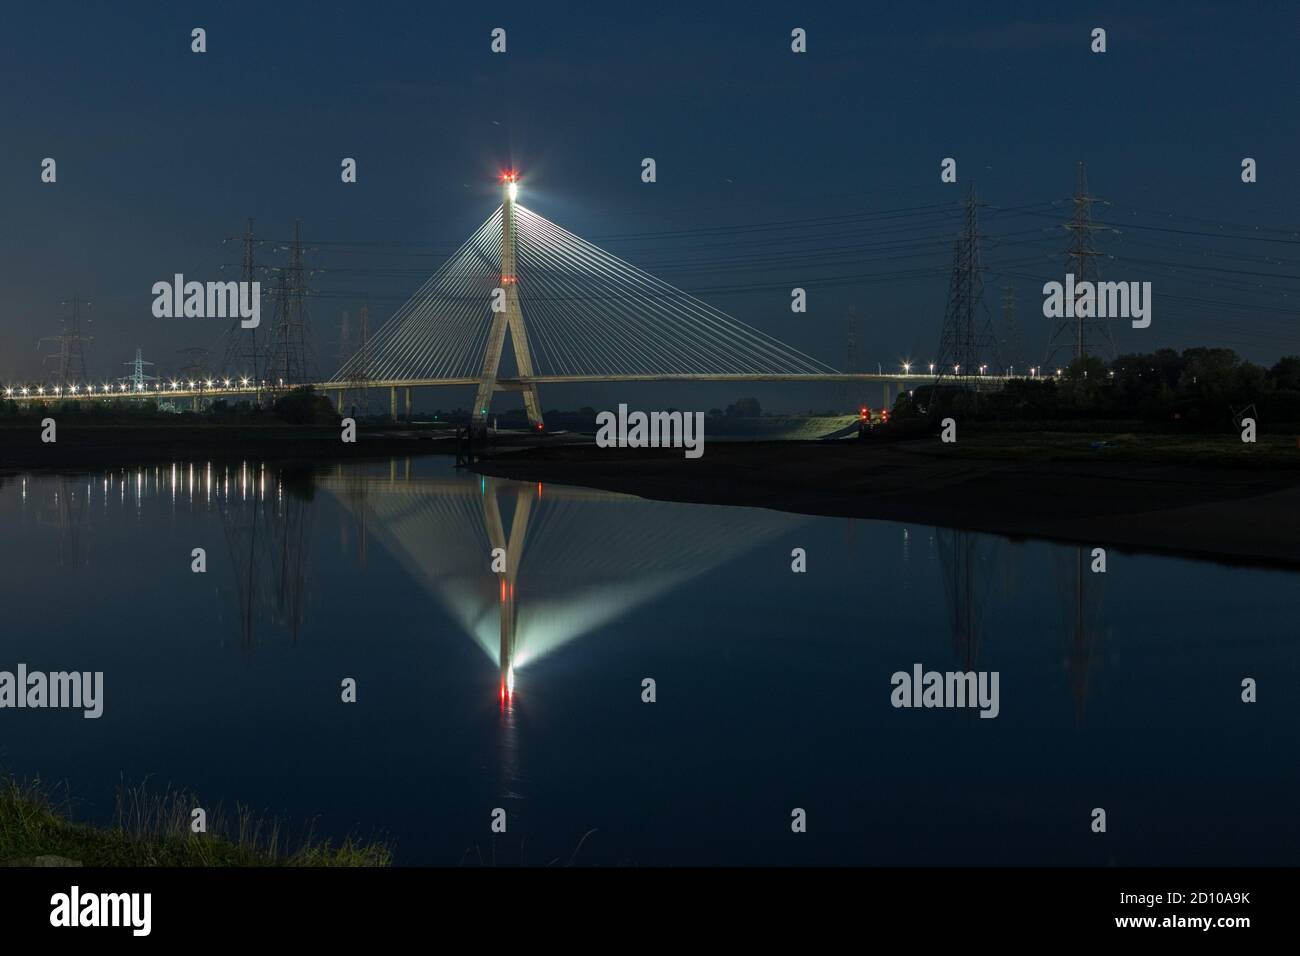 Cable-stayed concrete Flintshire Bridge,lit at night, spanning River Dee viewed from Connah's Quay. Fan like structure reflected in mirrored Estuary Stock Photo